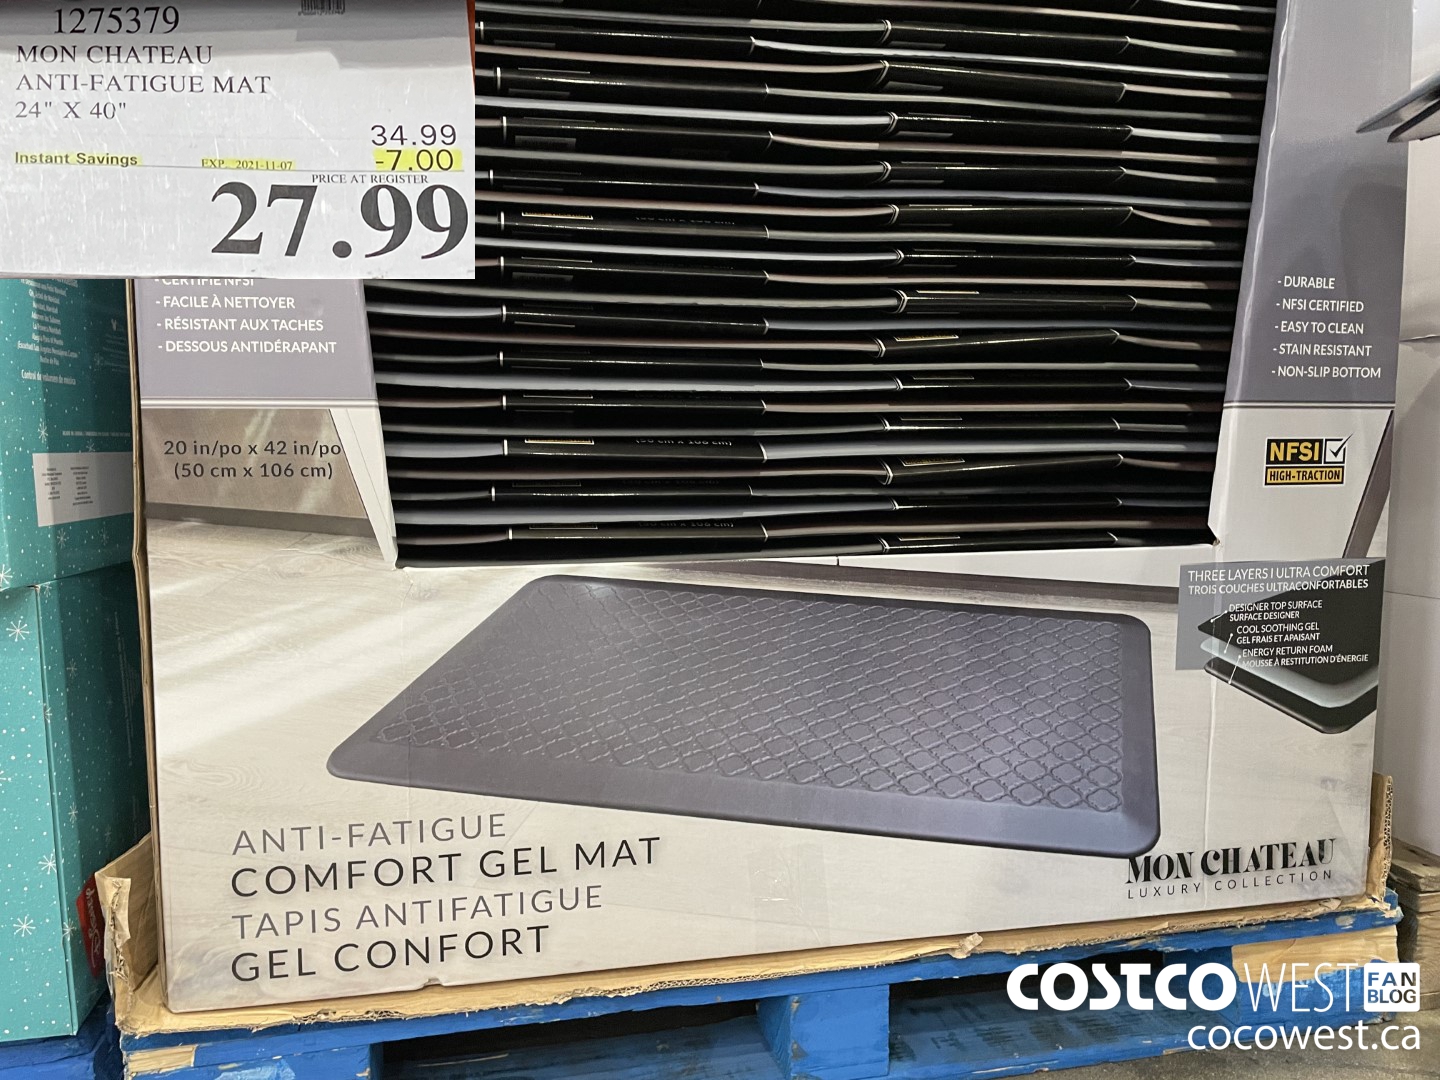 Costco Sale Item Review Mon Chateau Luxury Collection Anti-Fatigue